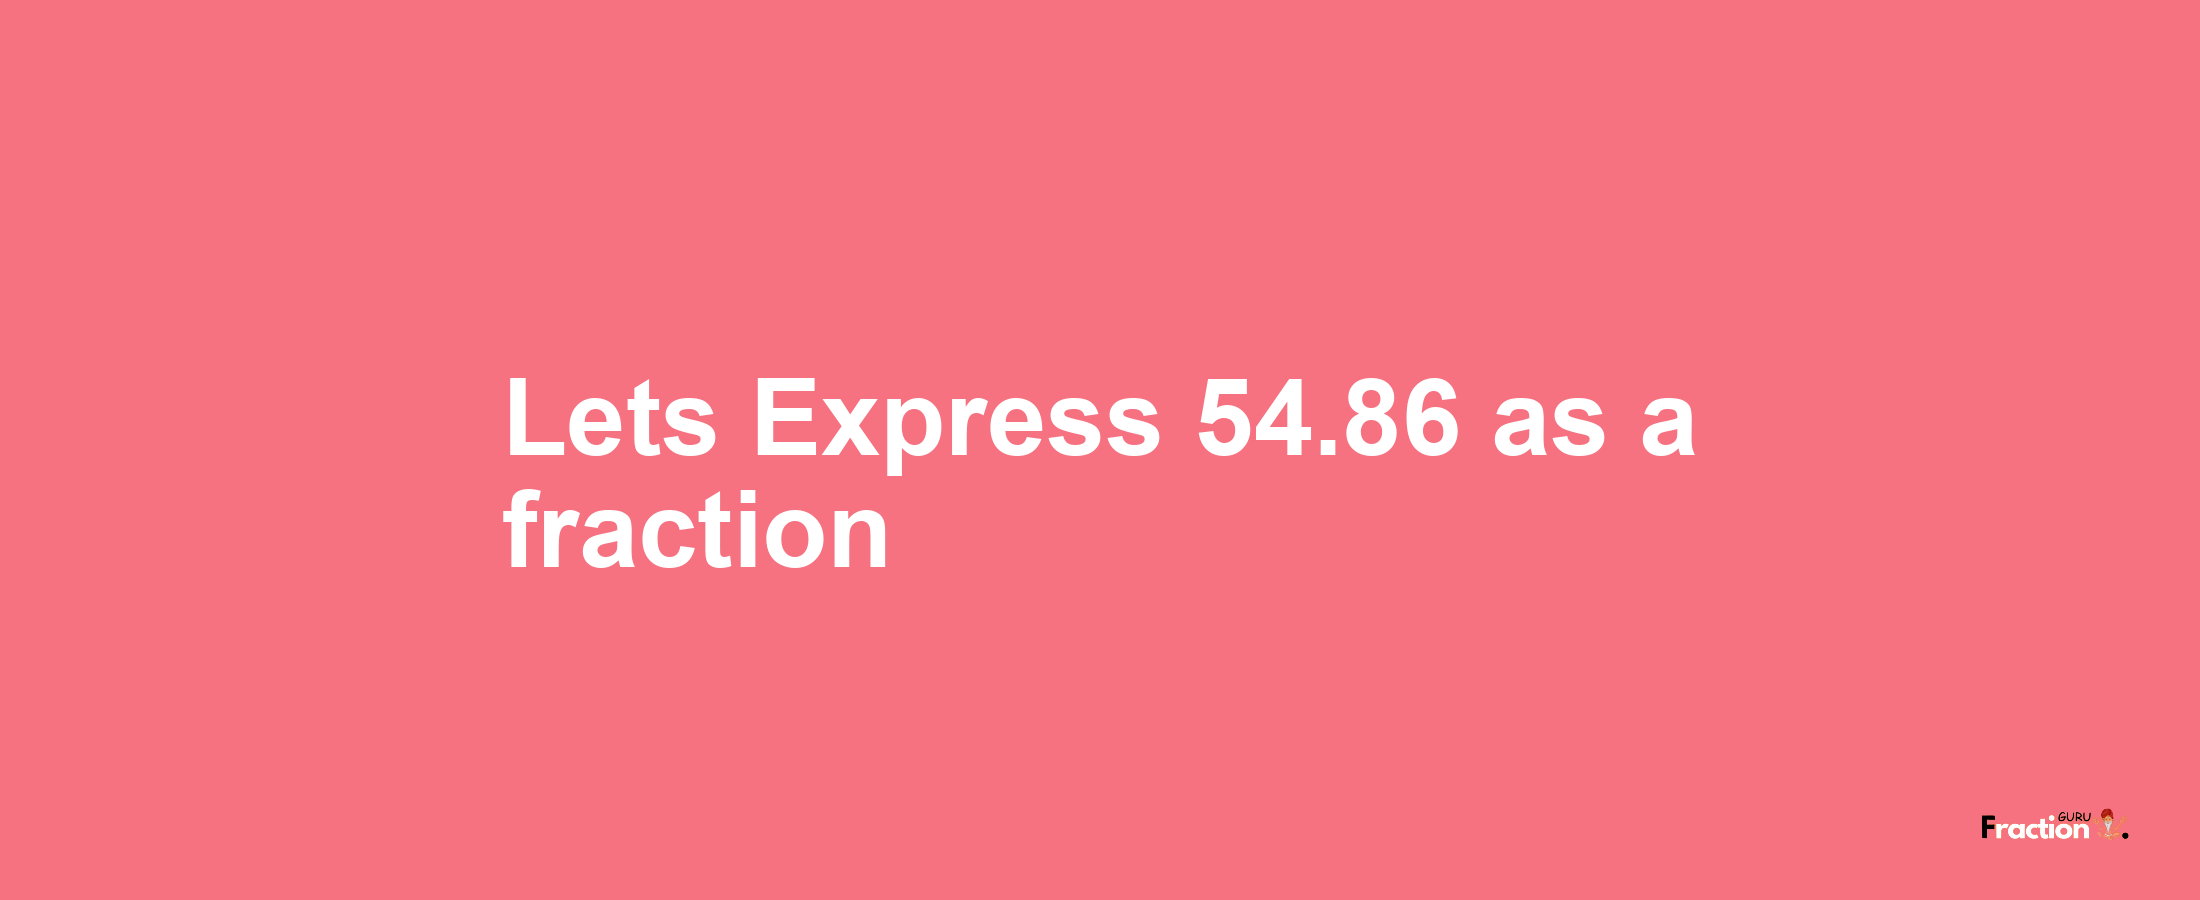 Lets Express 54.86 as afraction